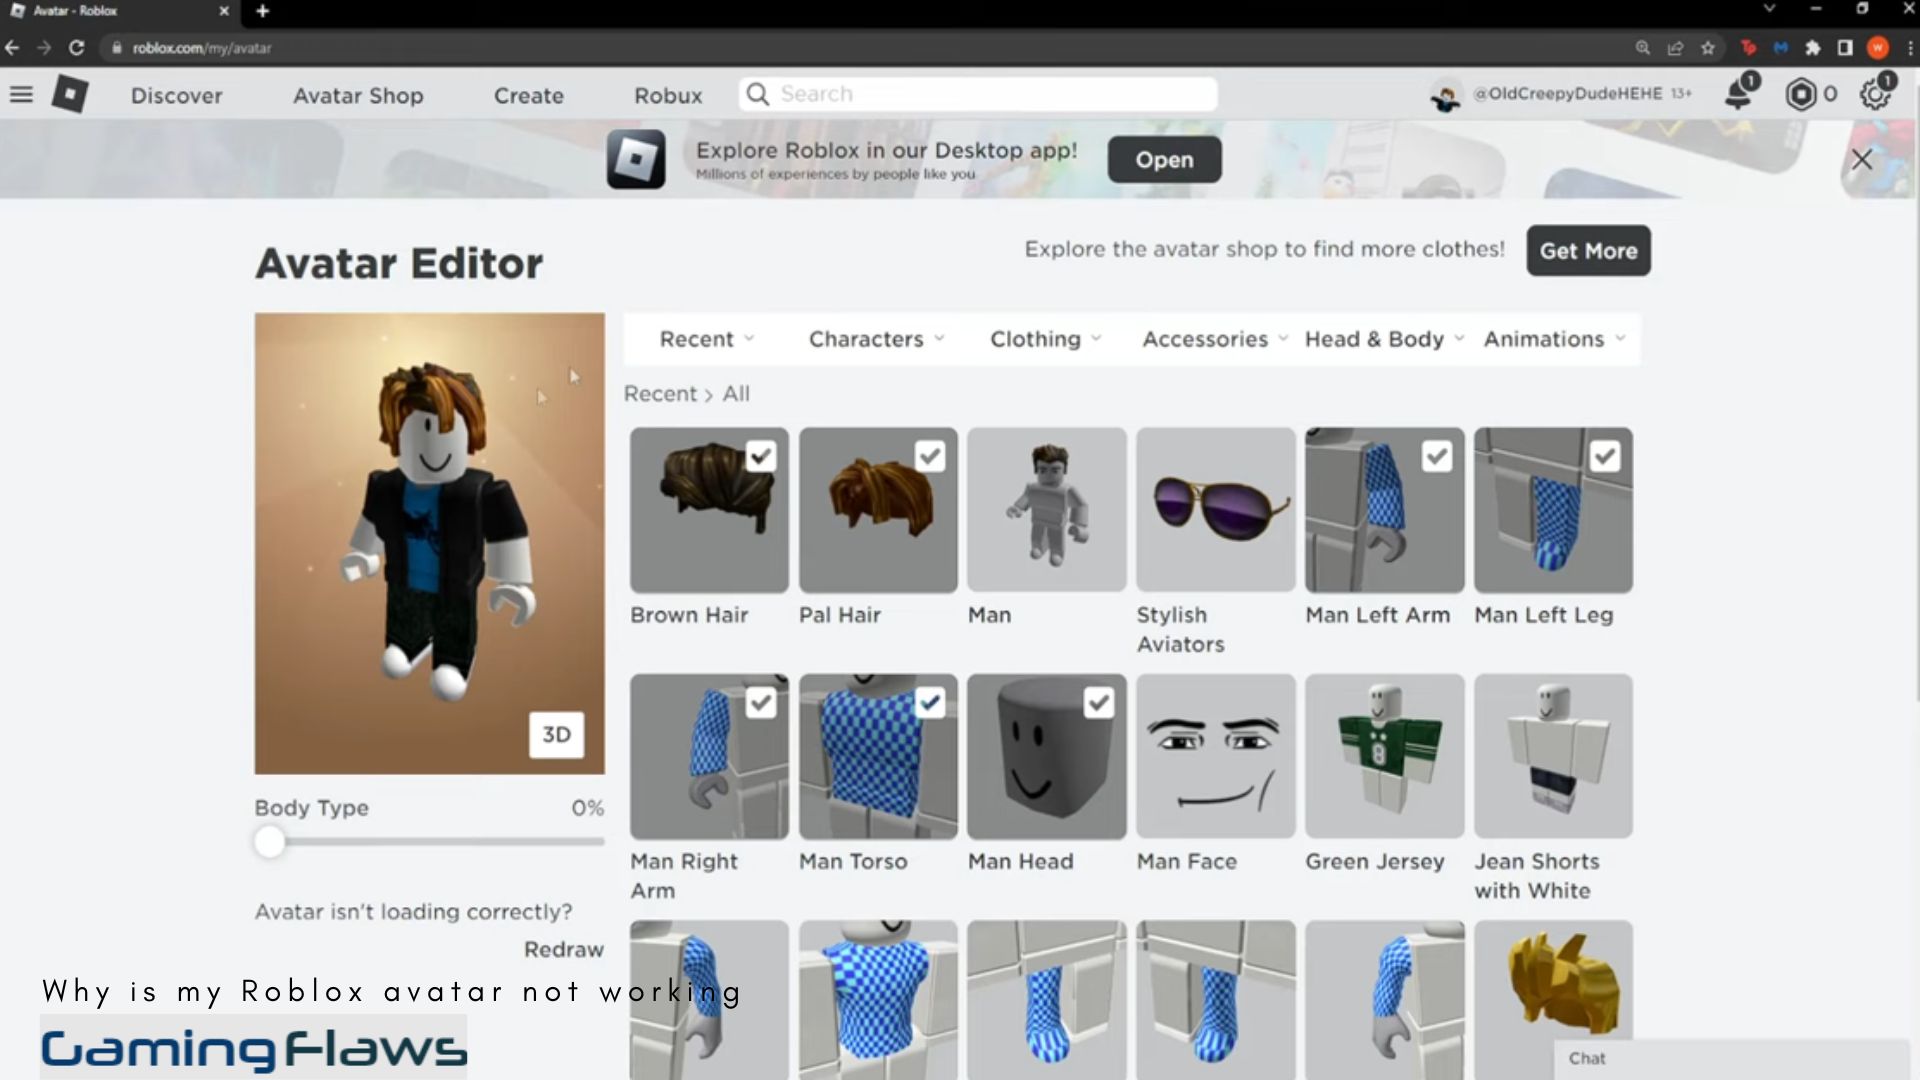 Why is my Roblox avatar not working